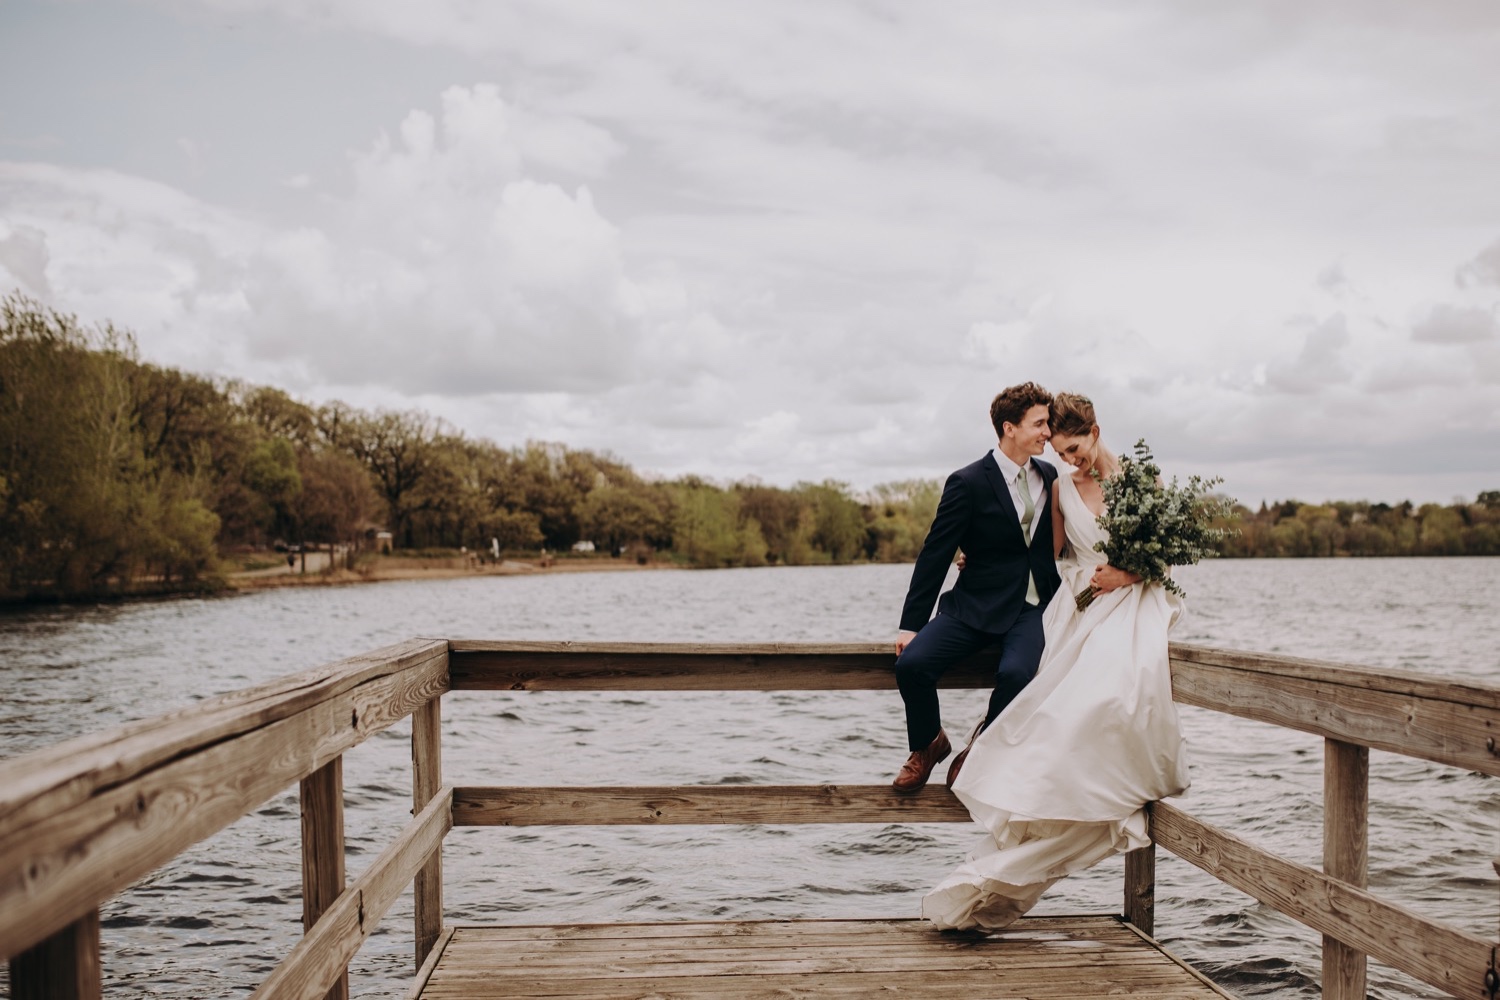 Bride and groom portraits at Lake harriet in minnesota. Minneapolis wedding photography.